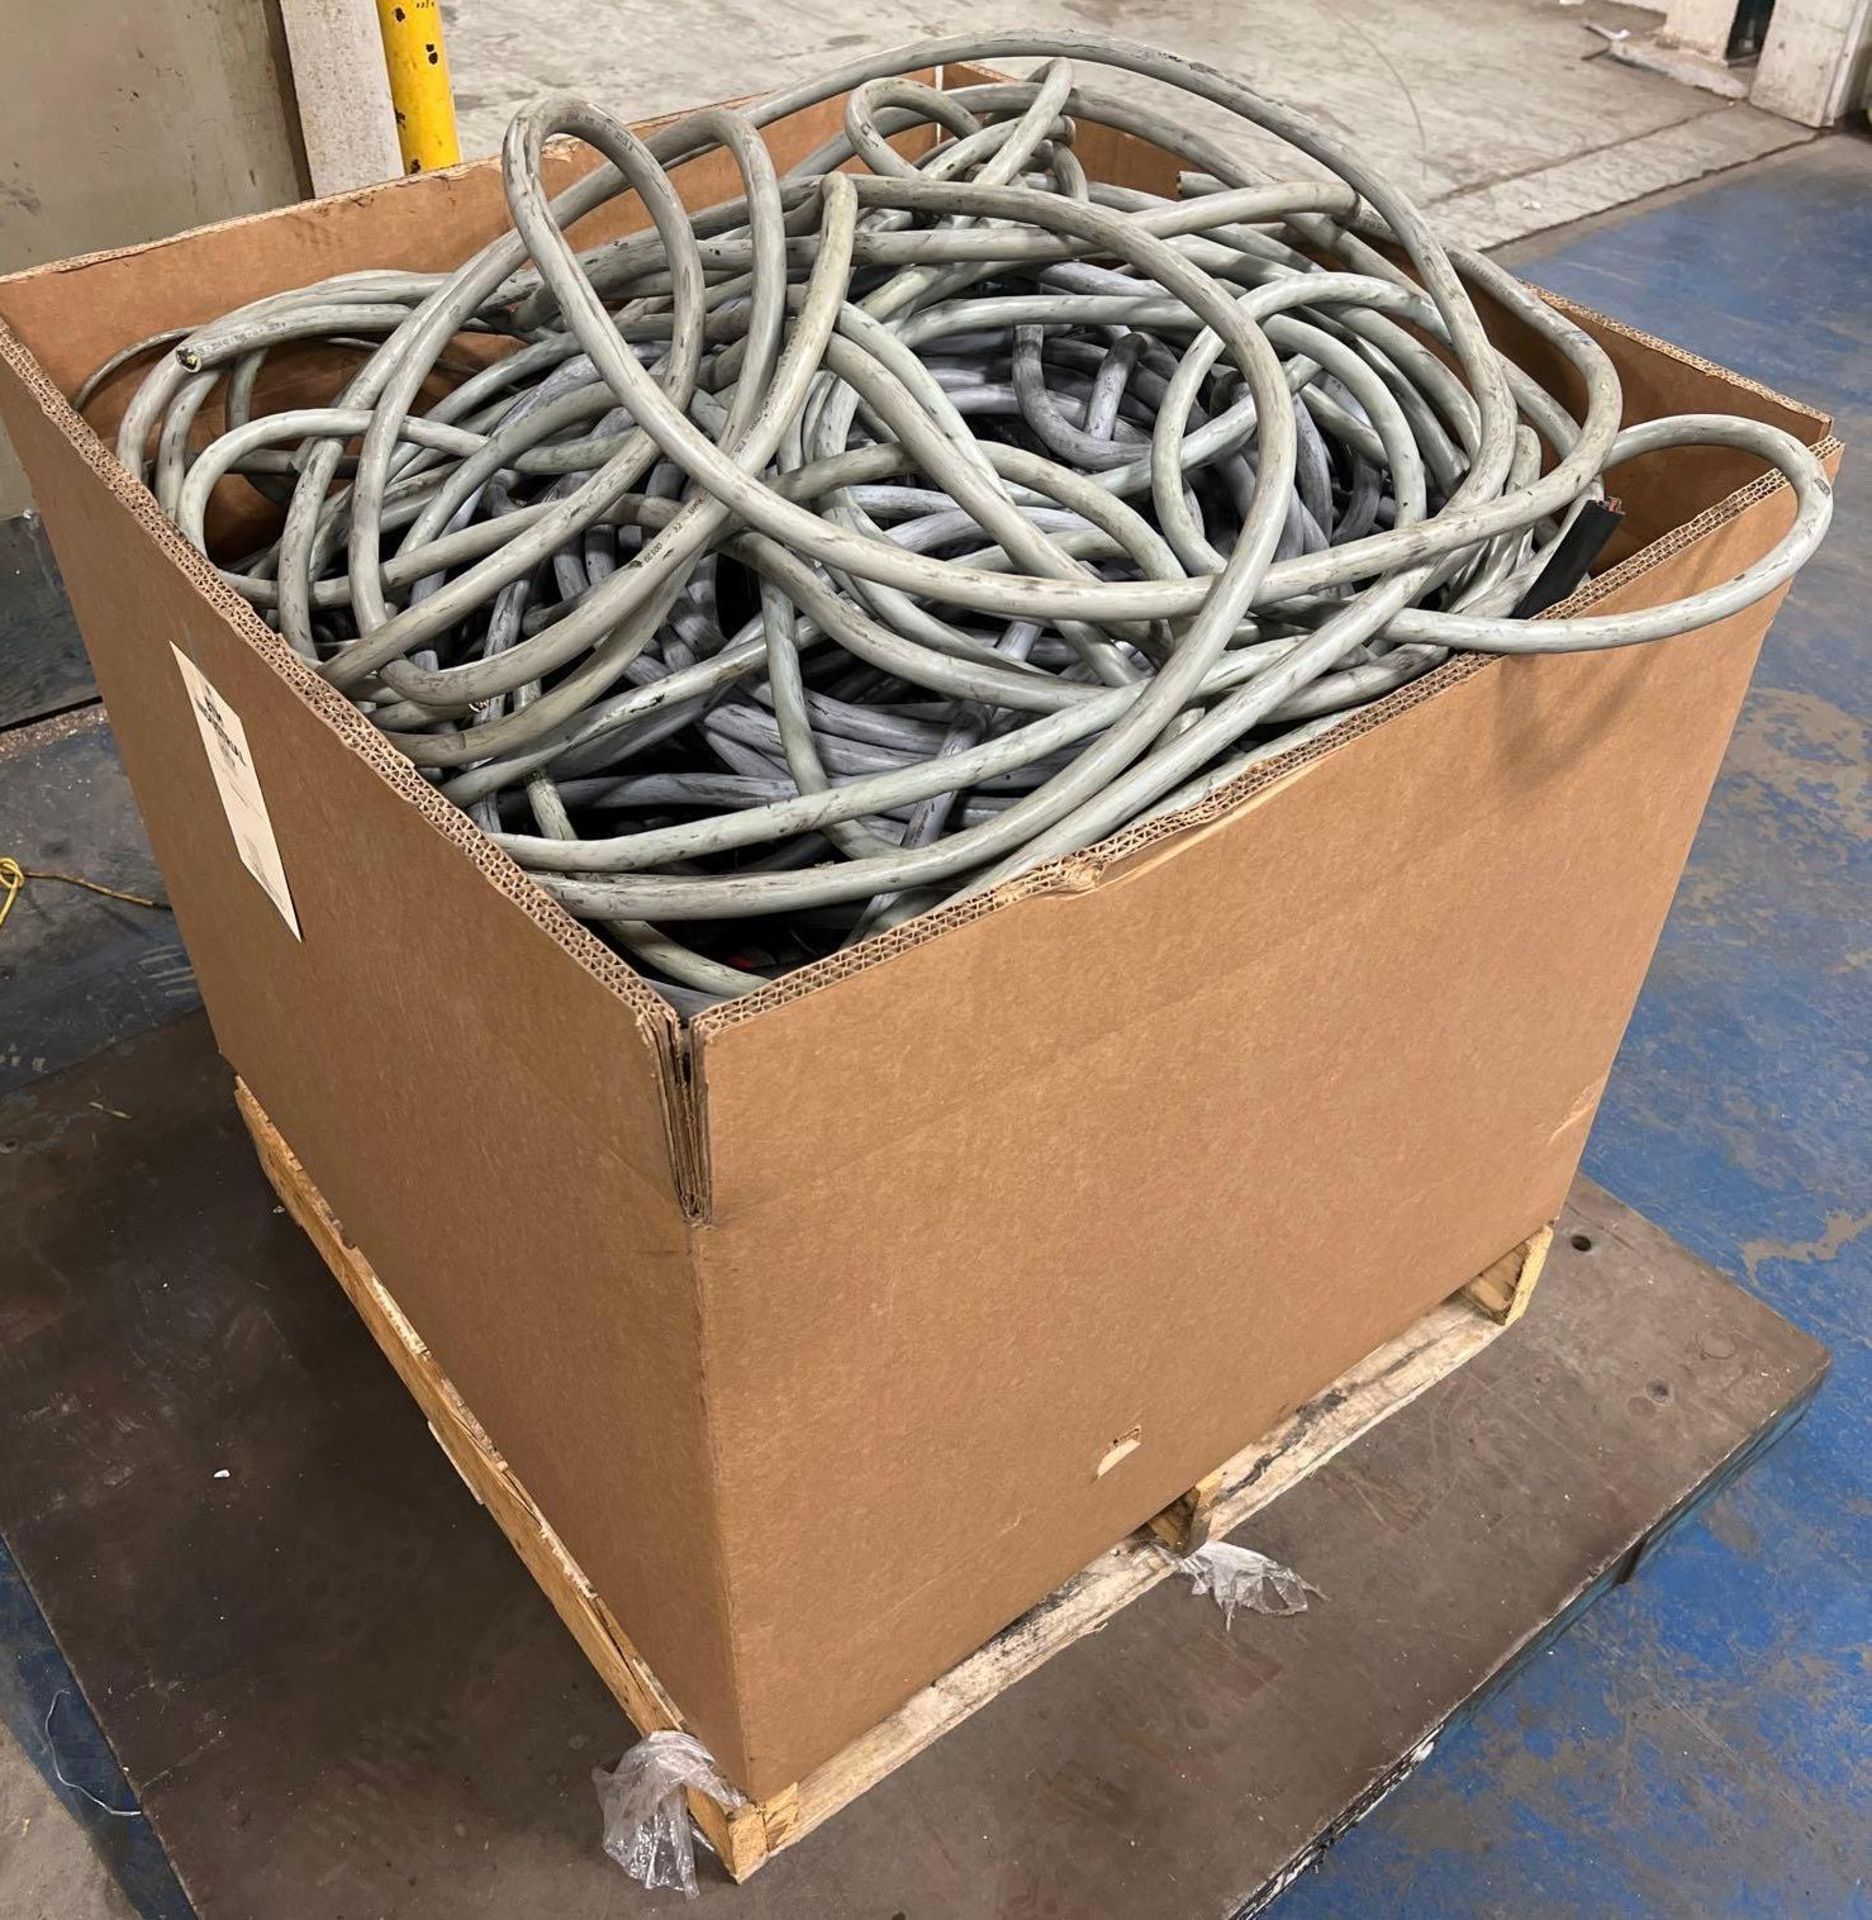 Scrap Wire (Insulated) 309 Lbs. (Includes Tare Weight)